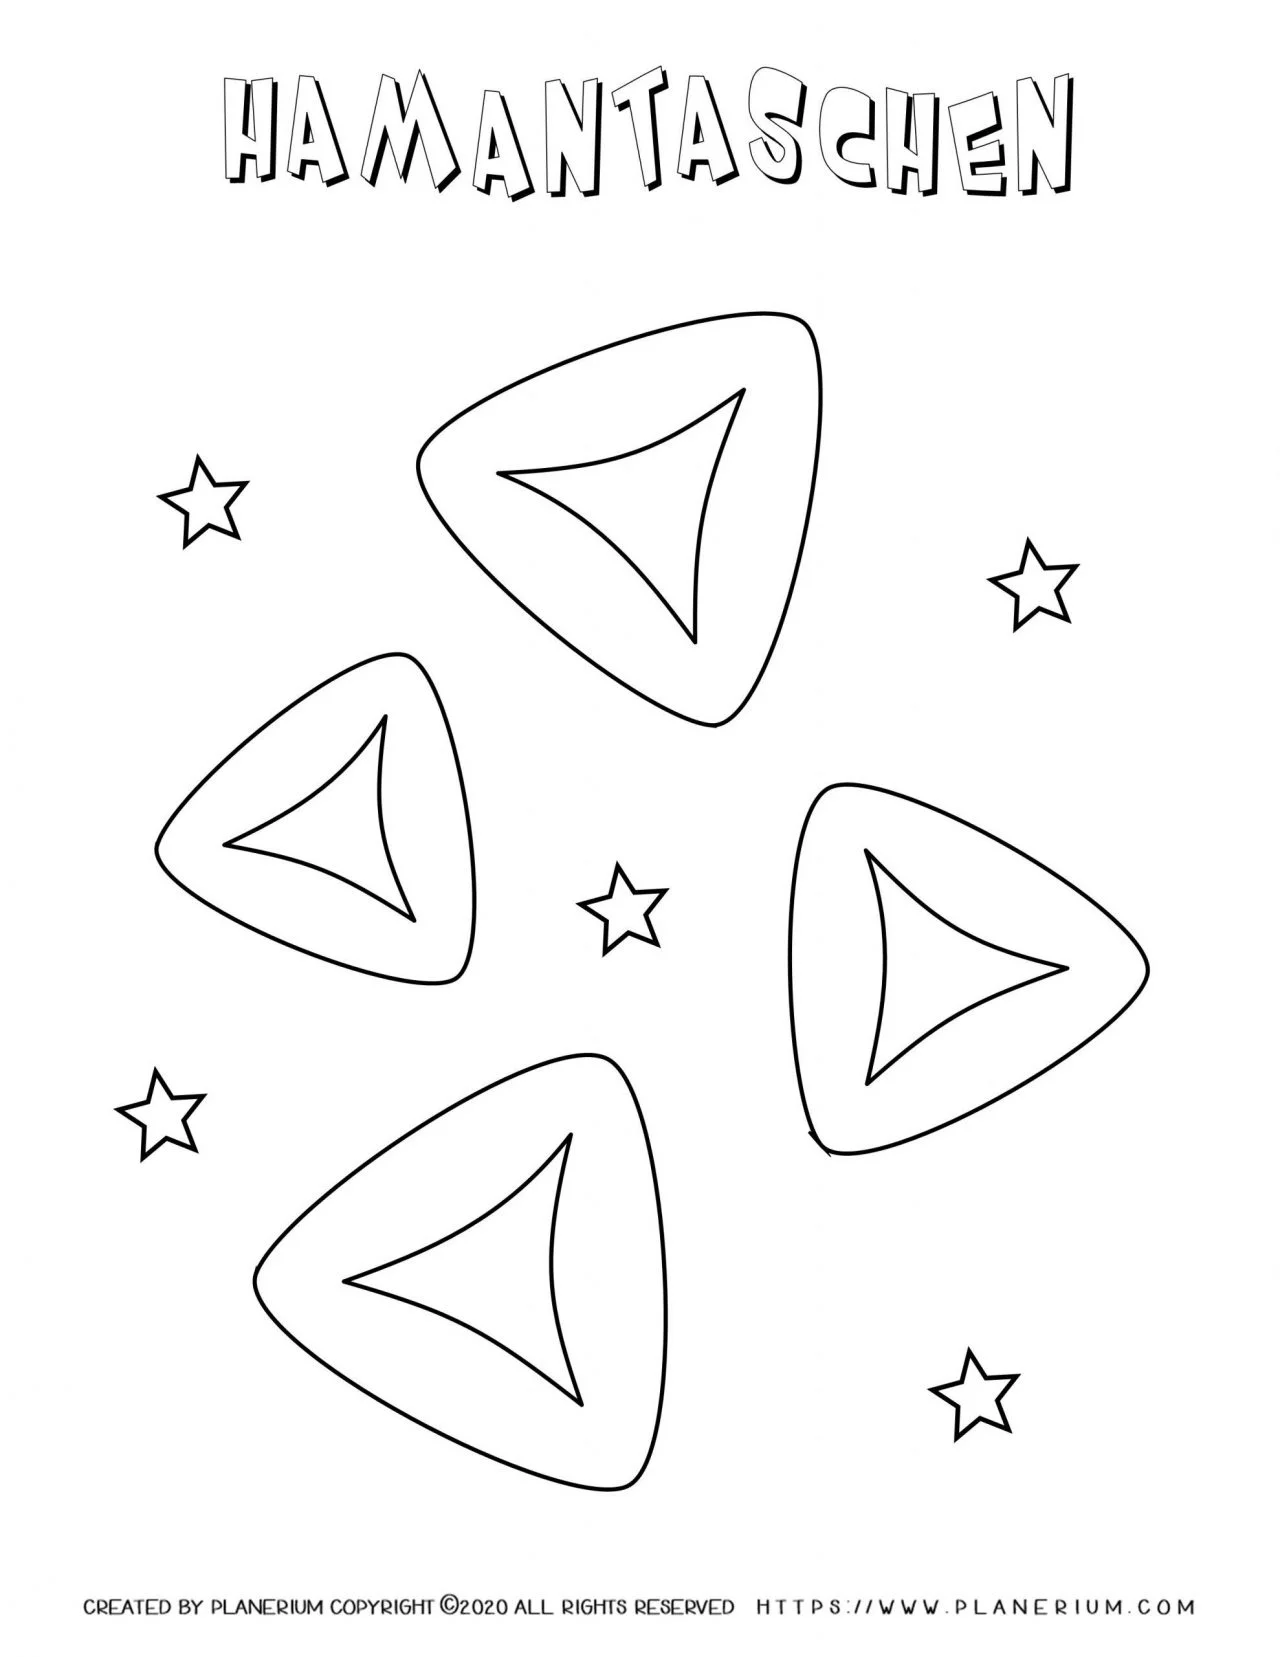 Purim 2020 Coloring page with Hamantaschen English title